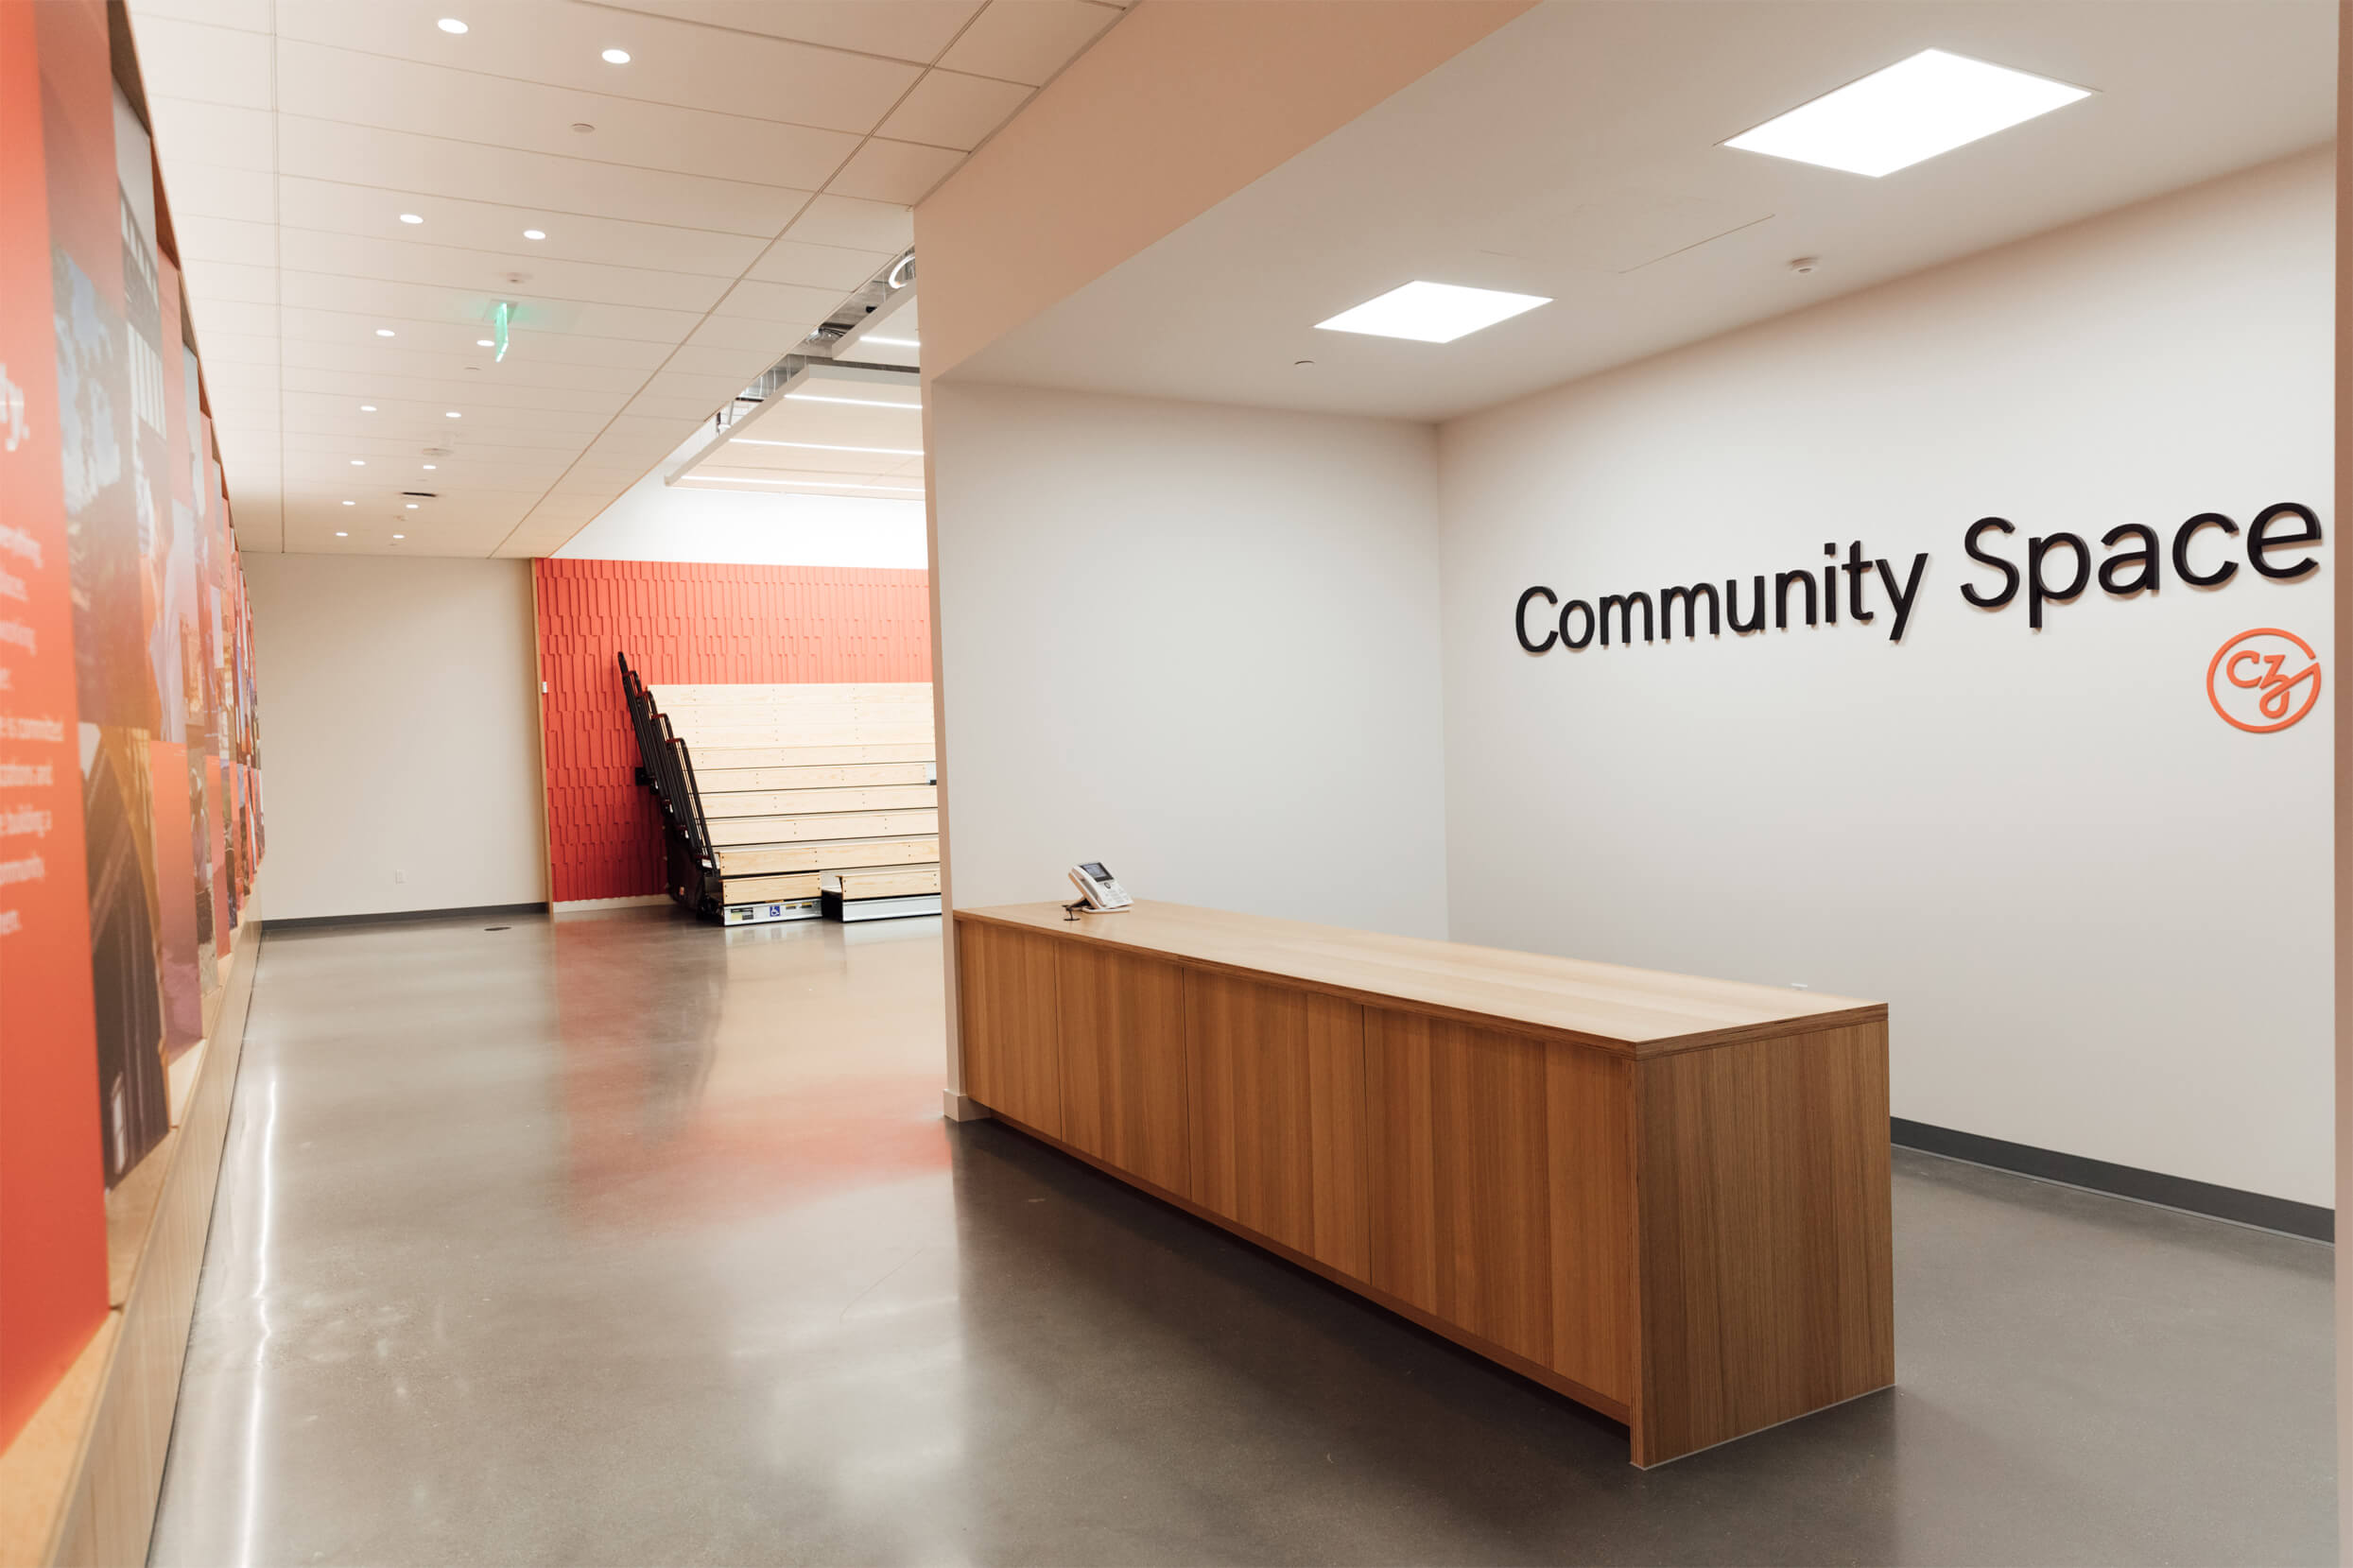 Empty lobby space with a large desk in front of a wall with “Community Space” text and logo.